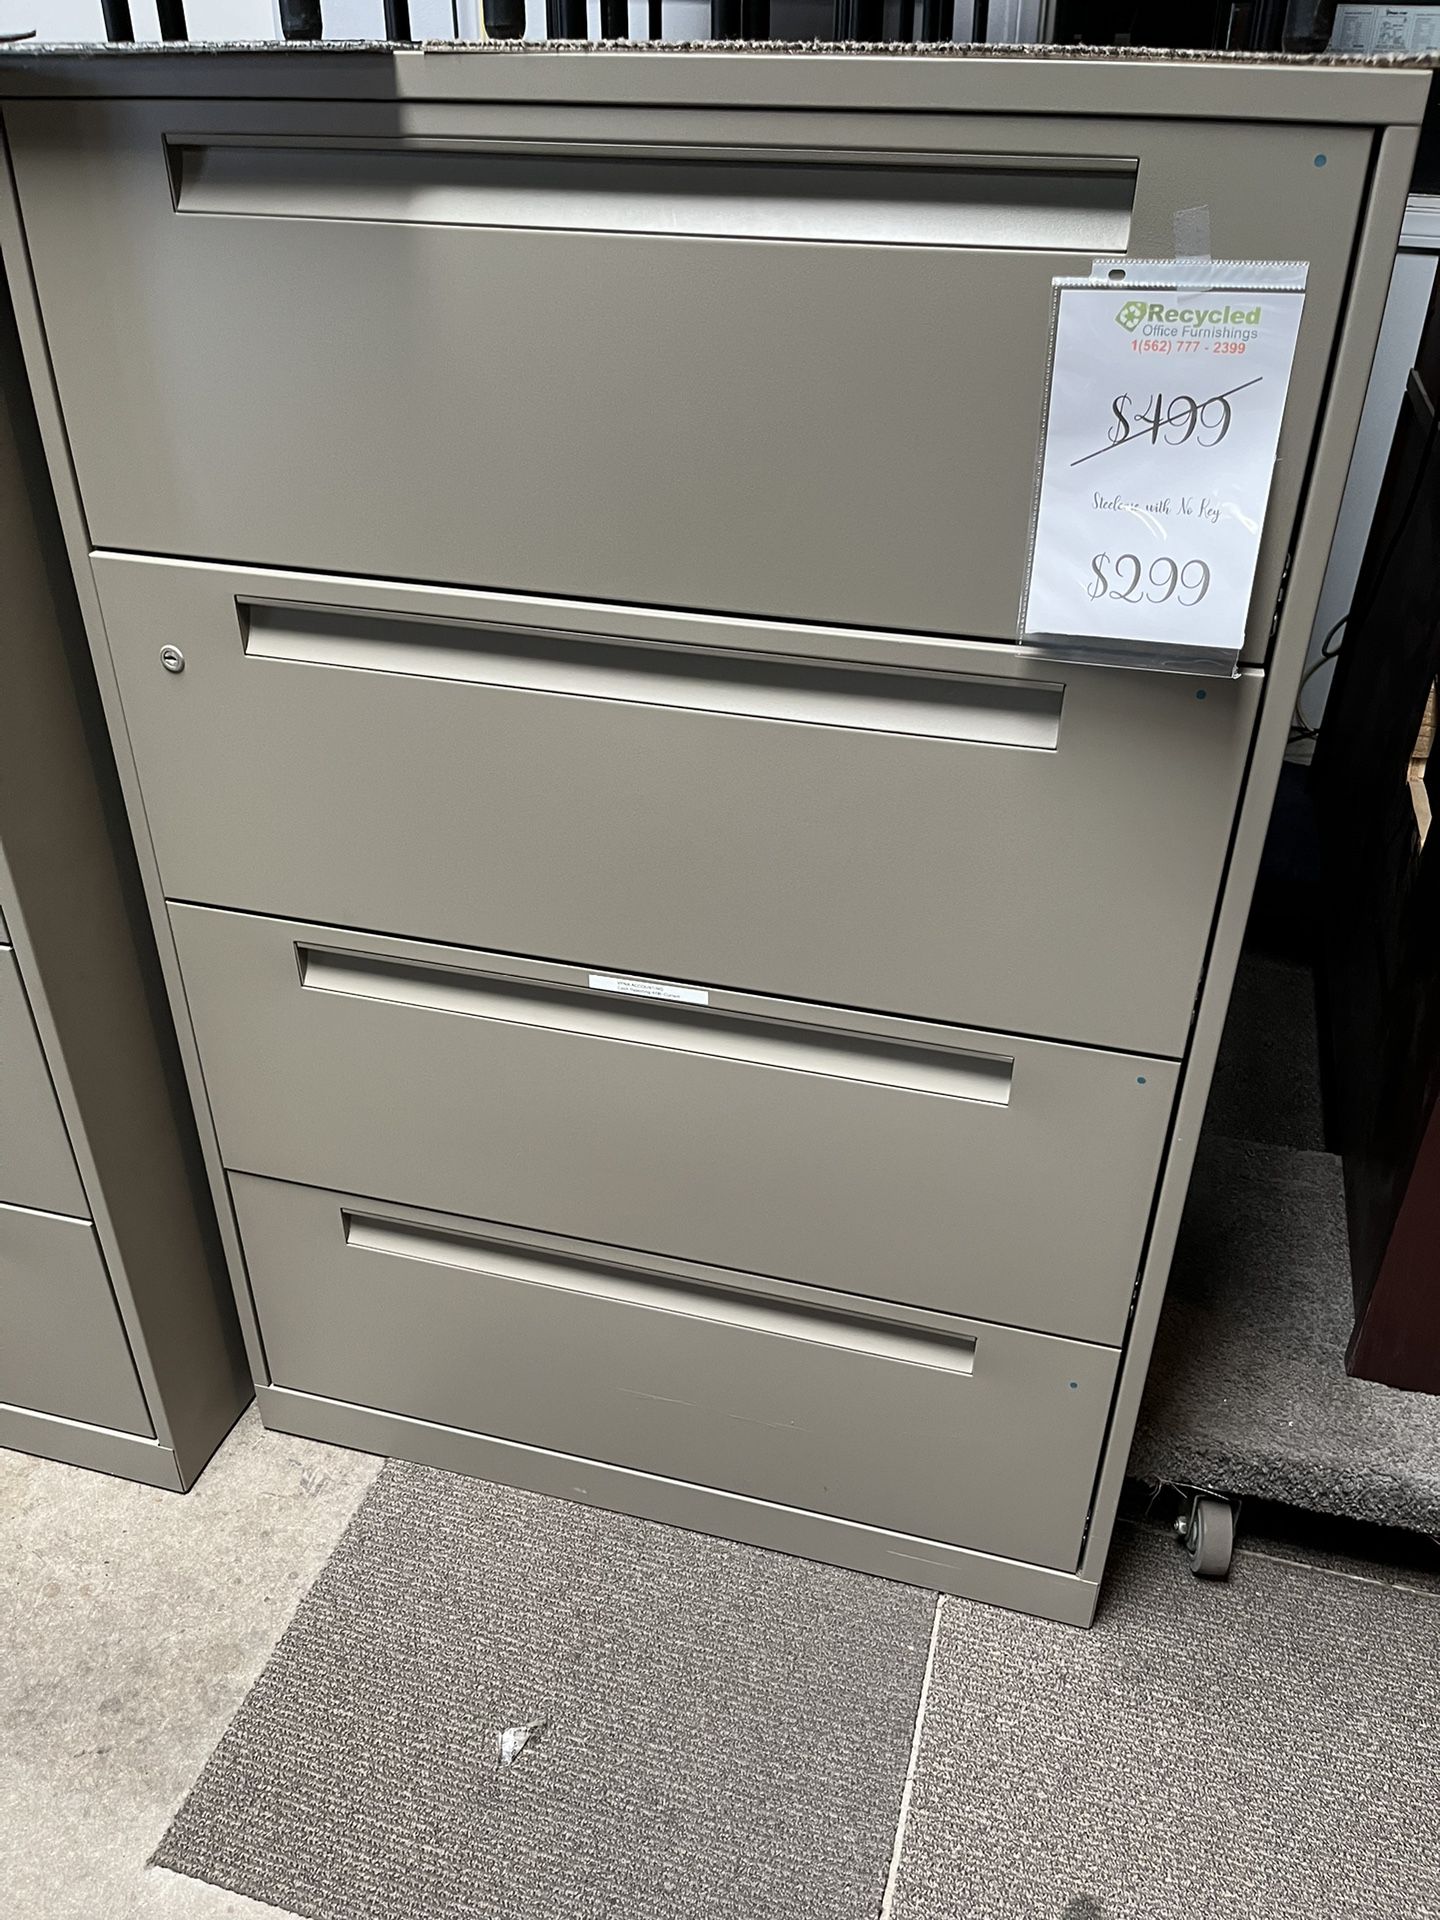 Steelcase Lateral Filing Cabinet 